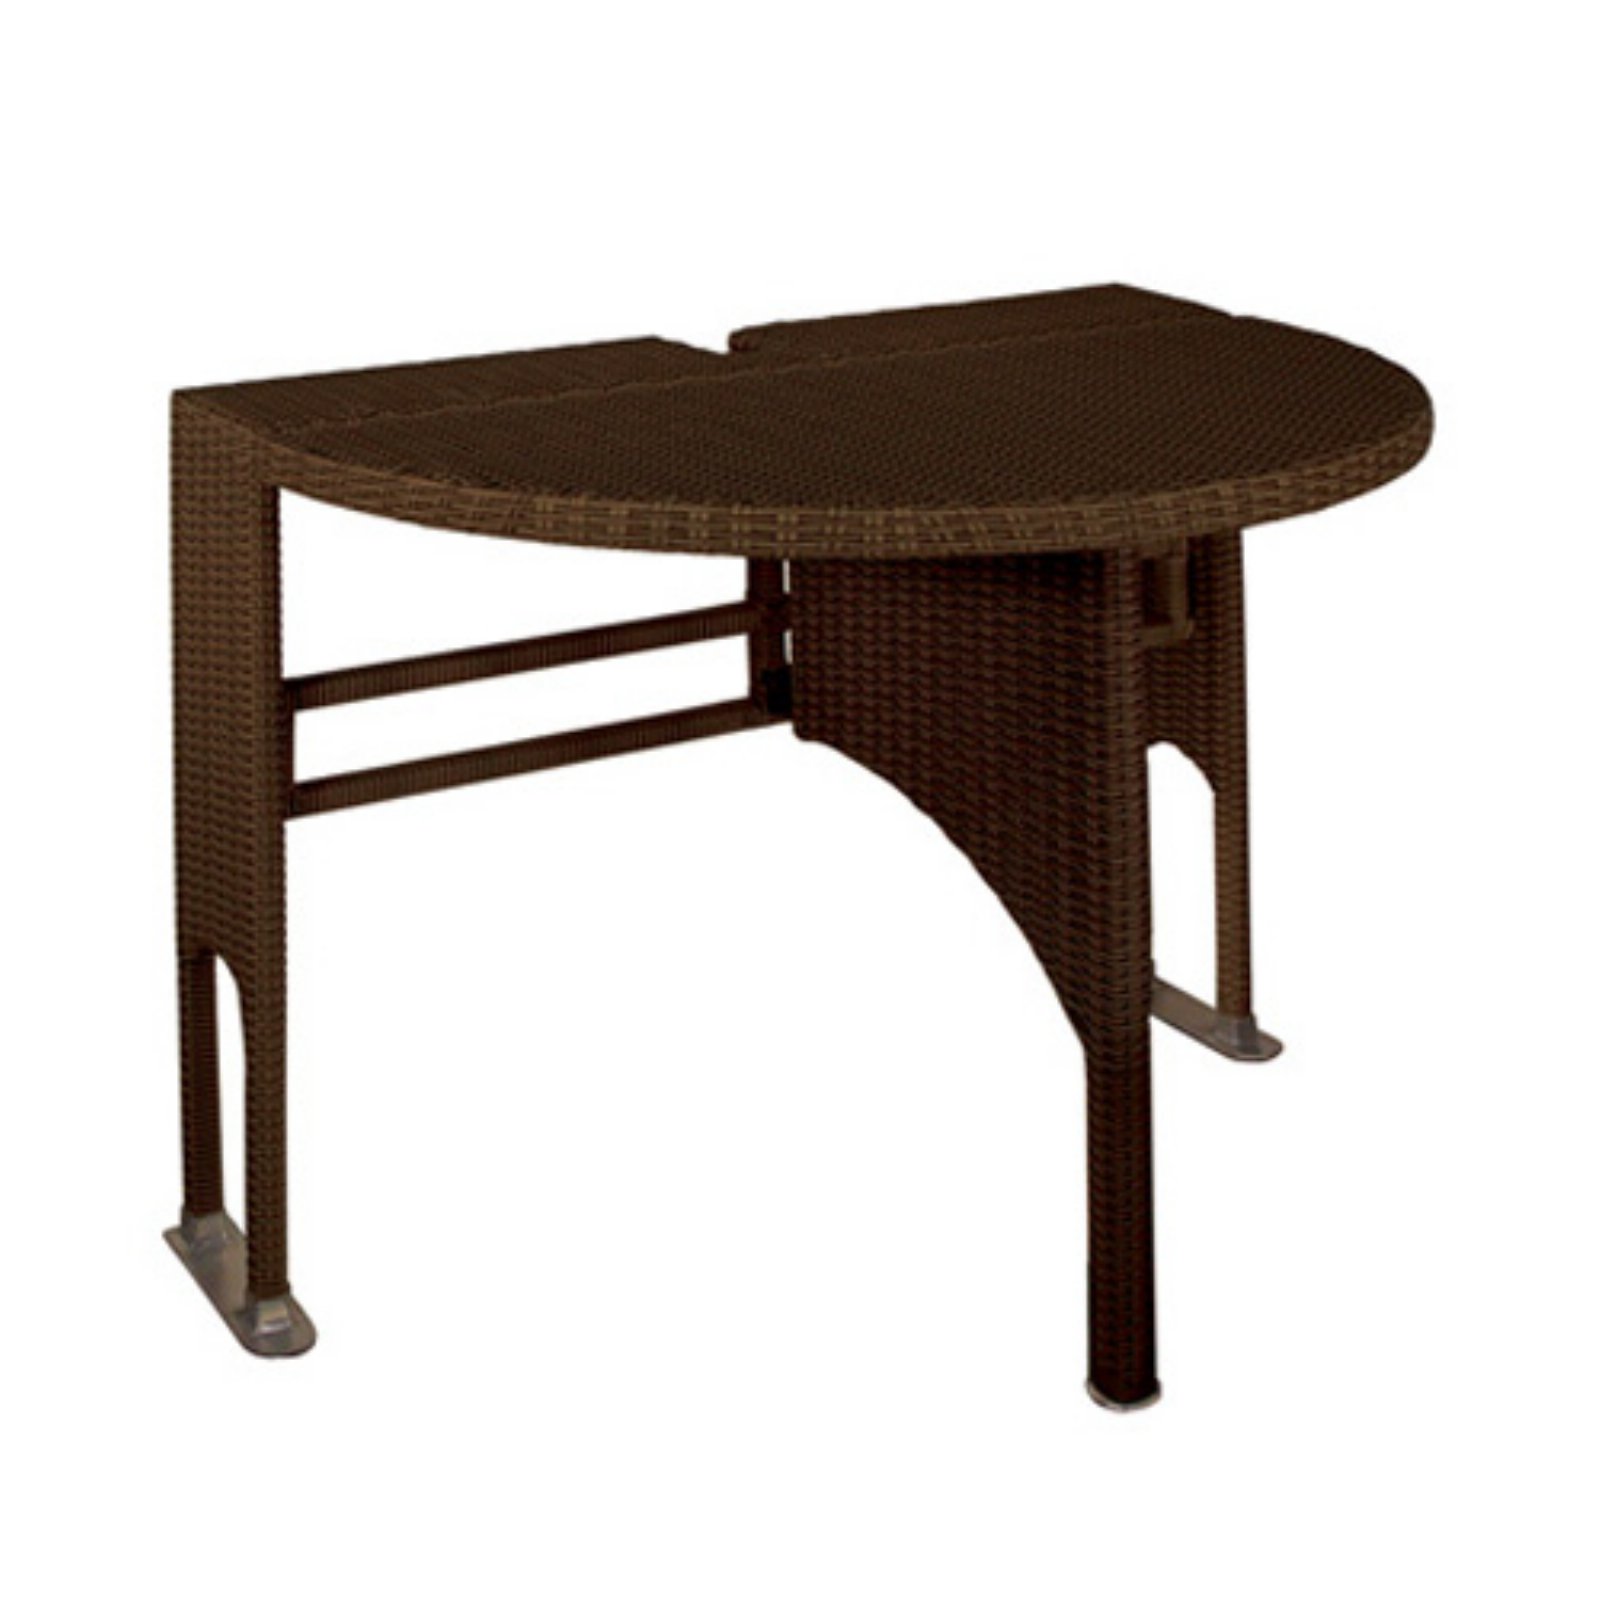 Blue Star Group Terrace Mates Adena All-Weather Wicker Java Color Table Set w/ 9'-Wide OFF-THE-WALL BRELLA - Chocolate Sunbrella Canopy - image 3 of 9